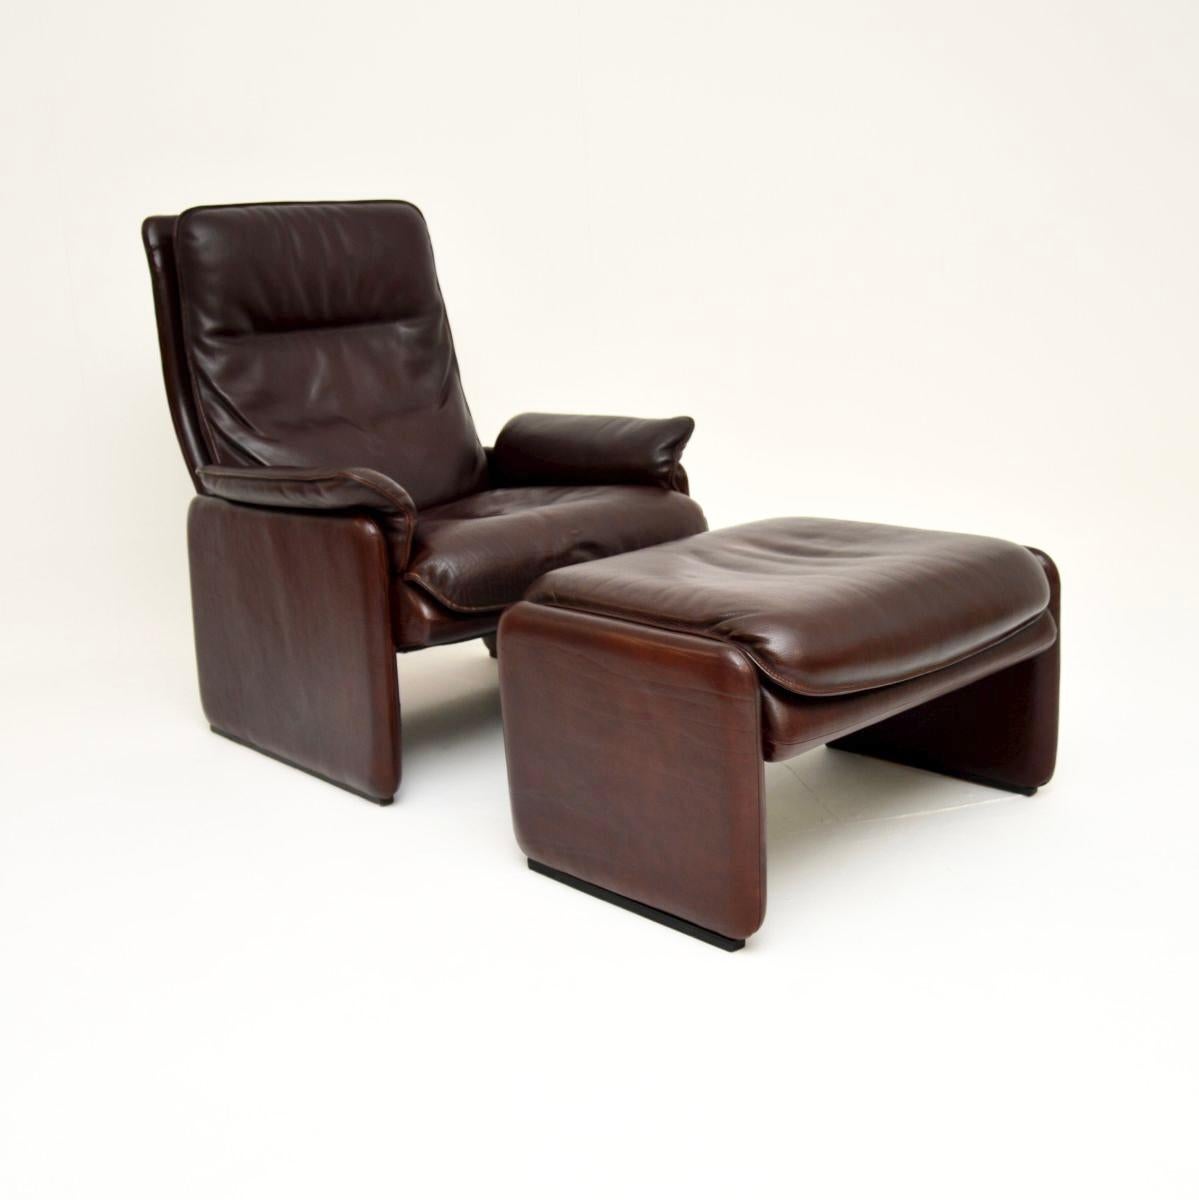 A stylish and incredibly comfortable vintage leather reclining armchair and stool by De Sede. They were made in Switzerland, and date from around the 1960-70’s.

The quality is absolutely superb, as with all De Sede products it is made from the